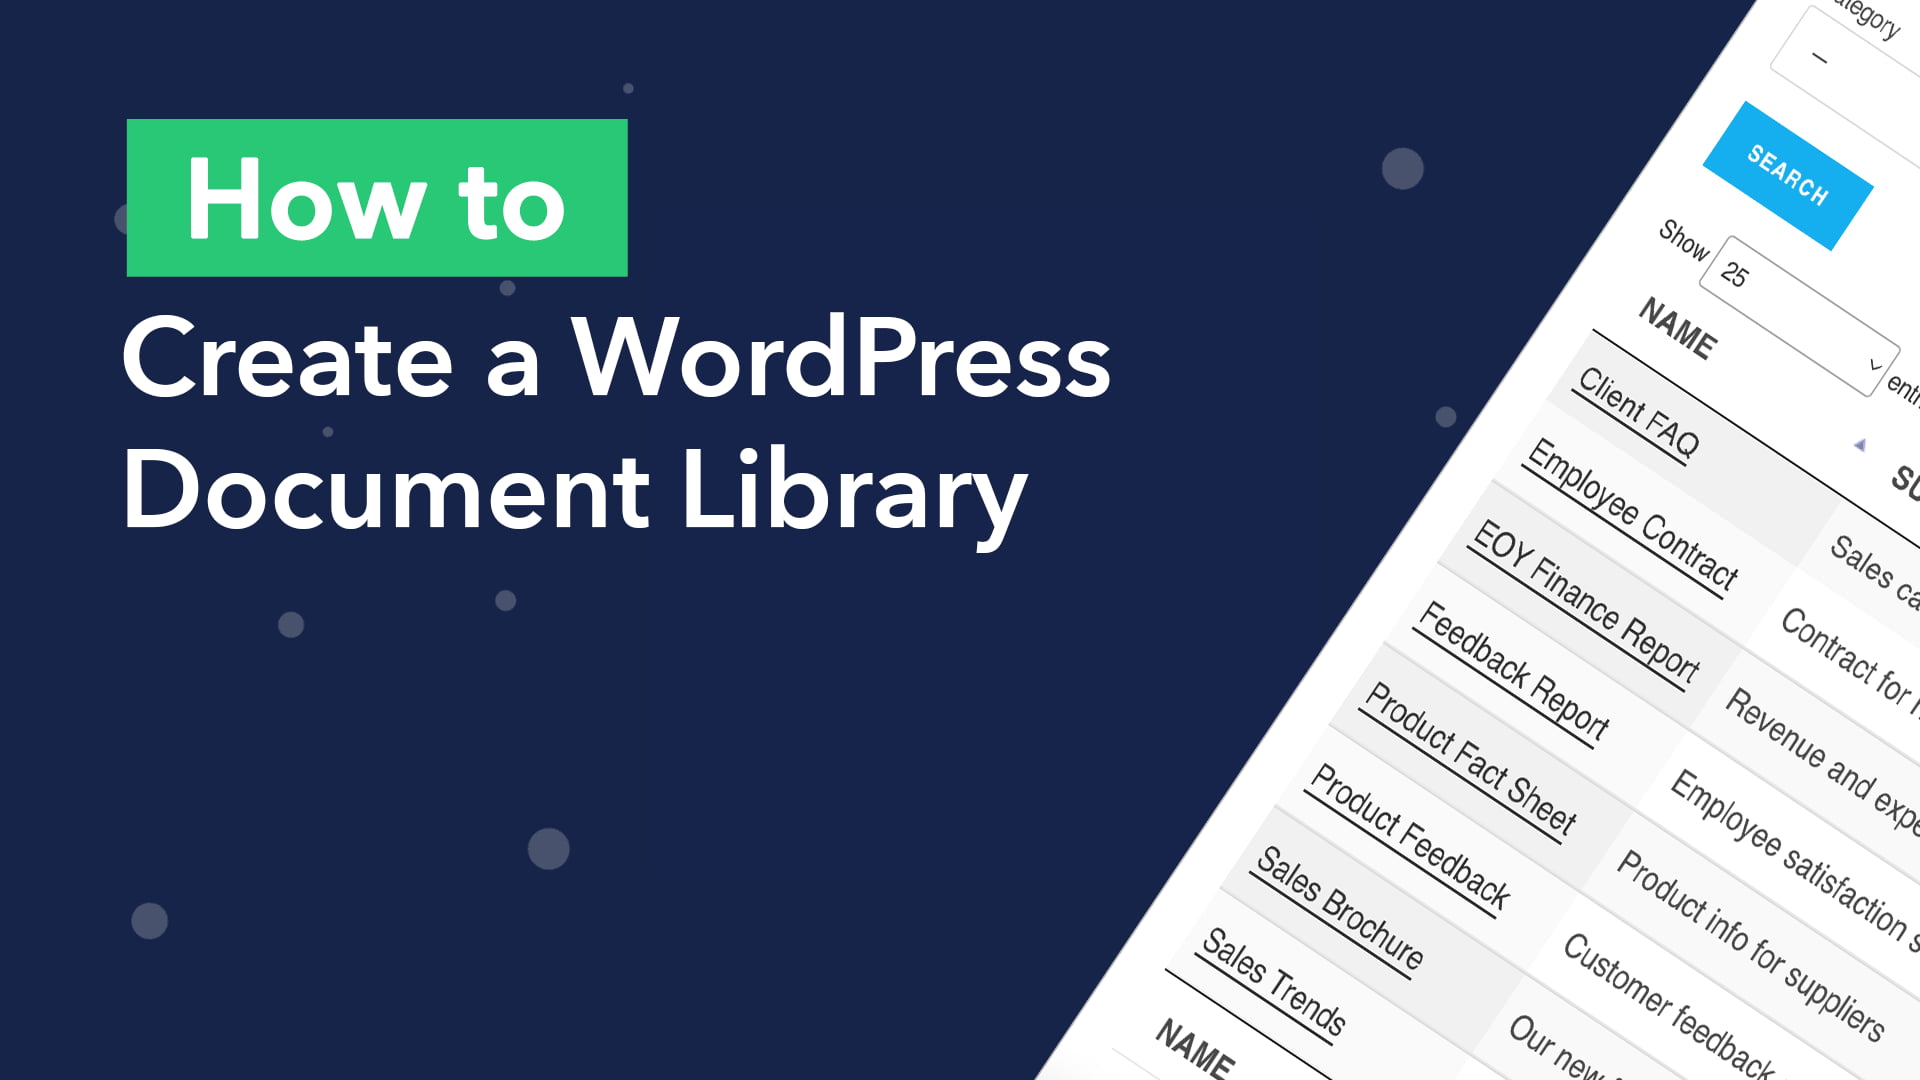 How to create a WordPress document library